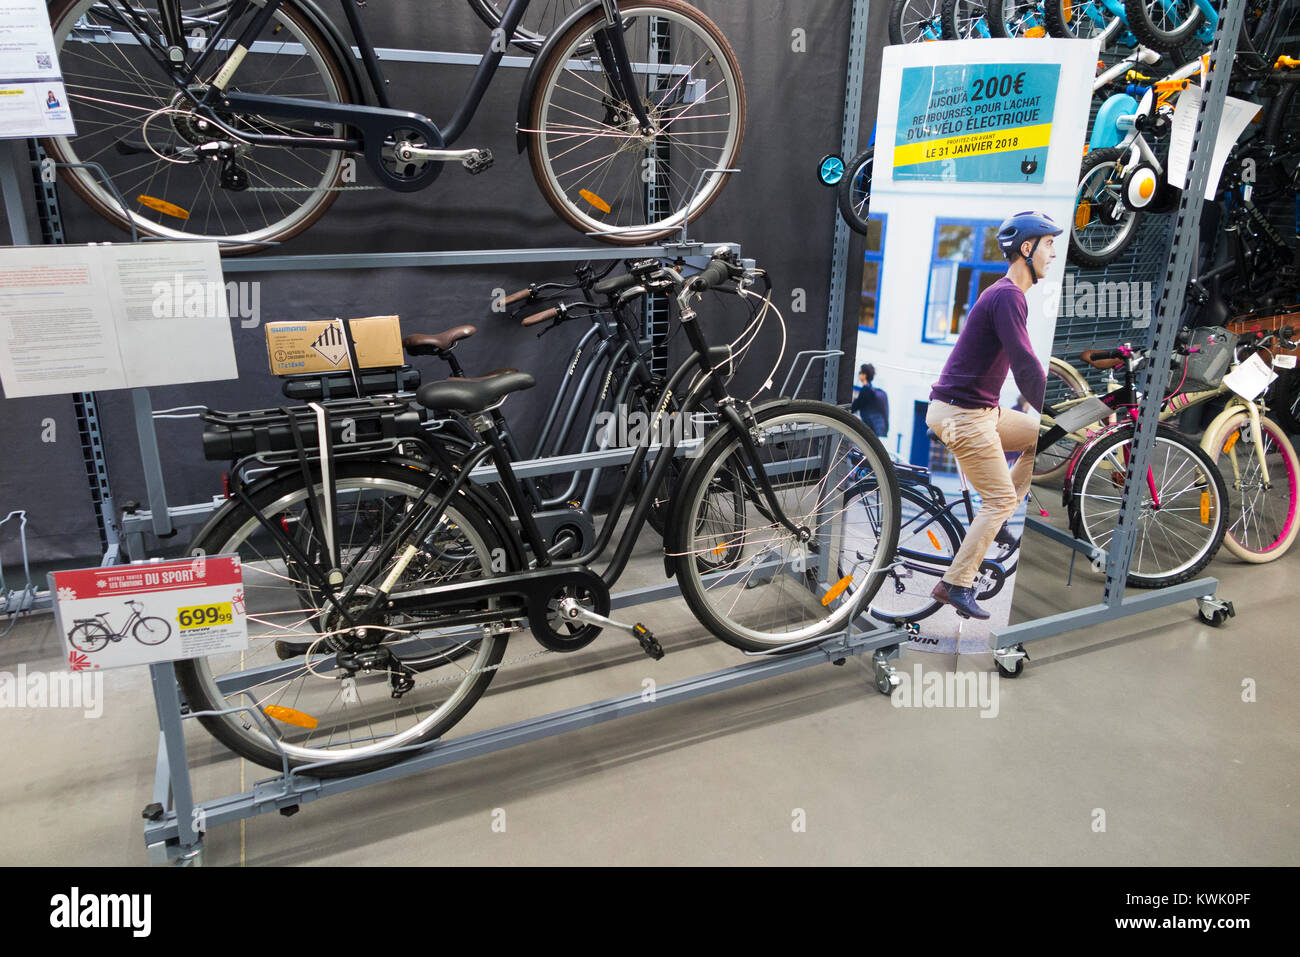 Electric powered bike / cycle / bicycle inside Decathlon sports / sporting  equipment shop / retailer / store Aix les Bains / Grésy-sur-Aix. France  Stock Photo - Alamy